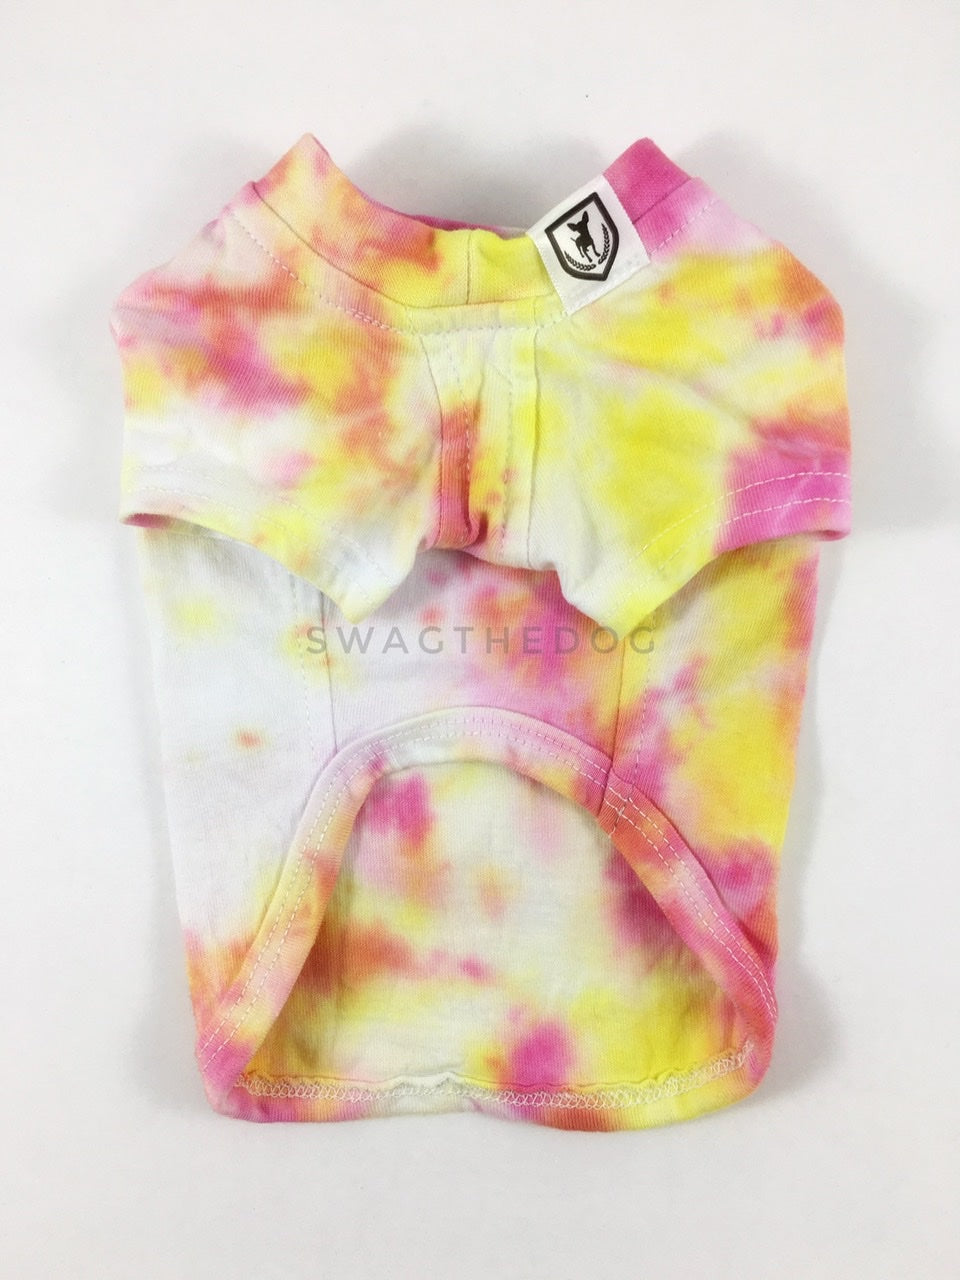 Swagadelic Cotton Candy Tie Dye Tee - Product front view. The hand tie-dyed tee with Pink and Yellow